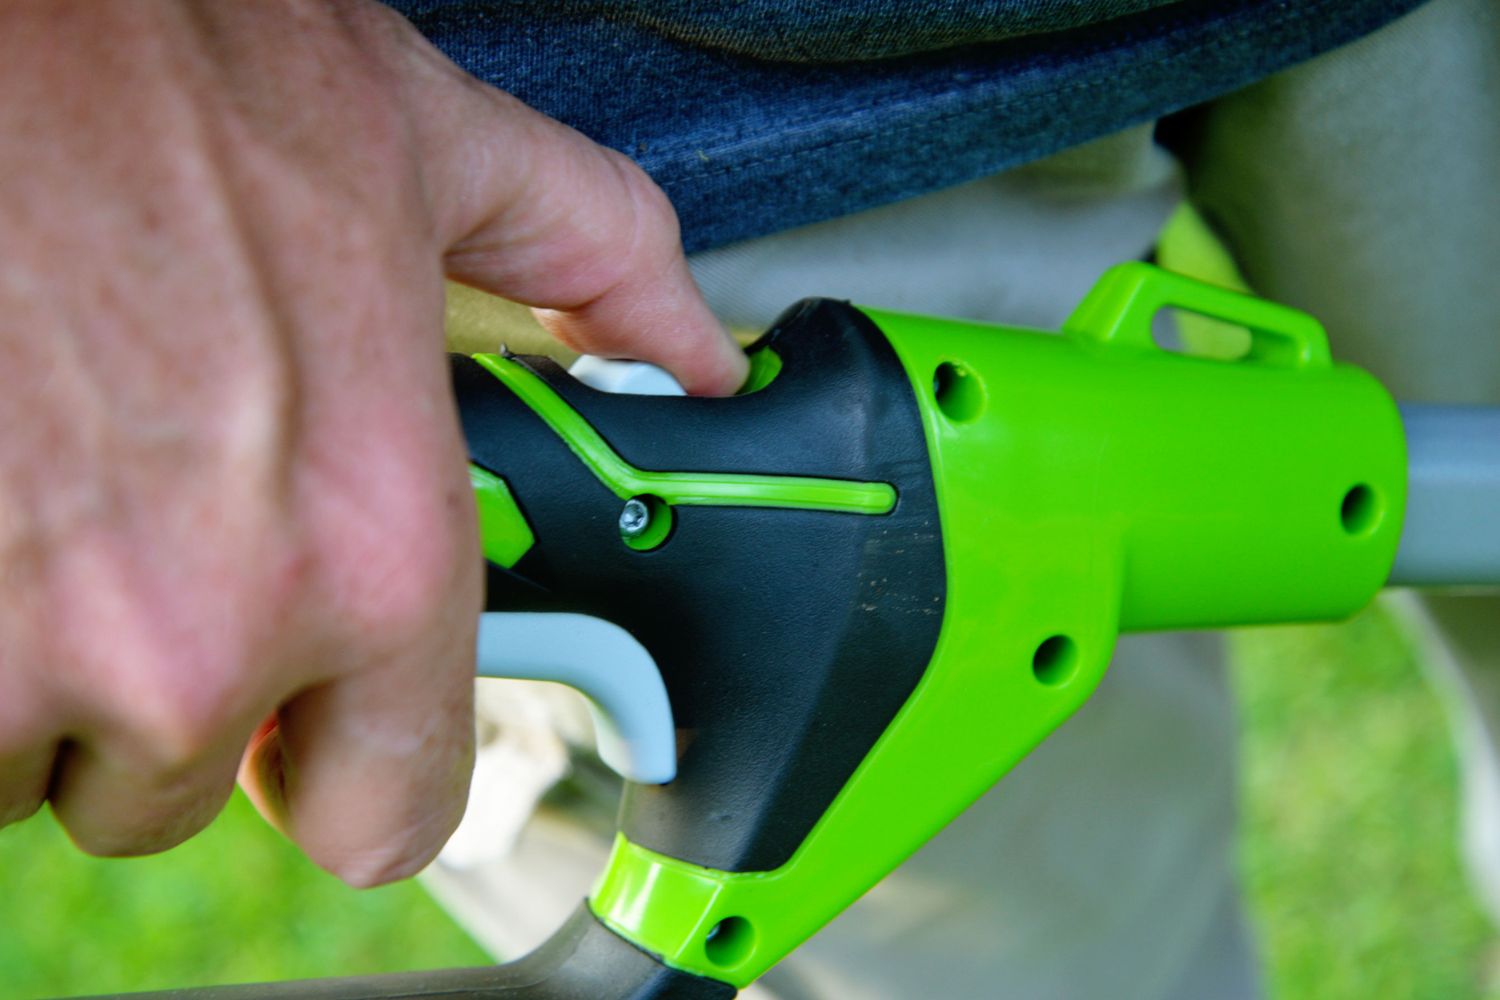 A close-up of the power and safety switches on the Greenworks 40V cordless pole saw